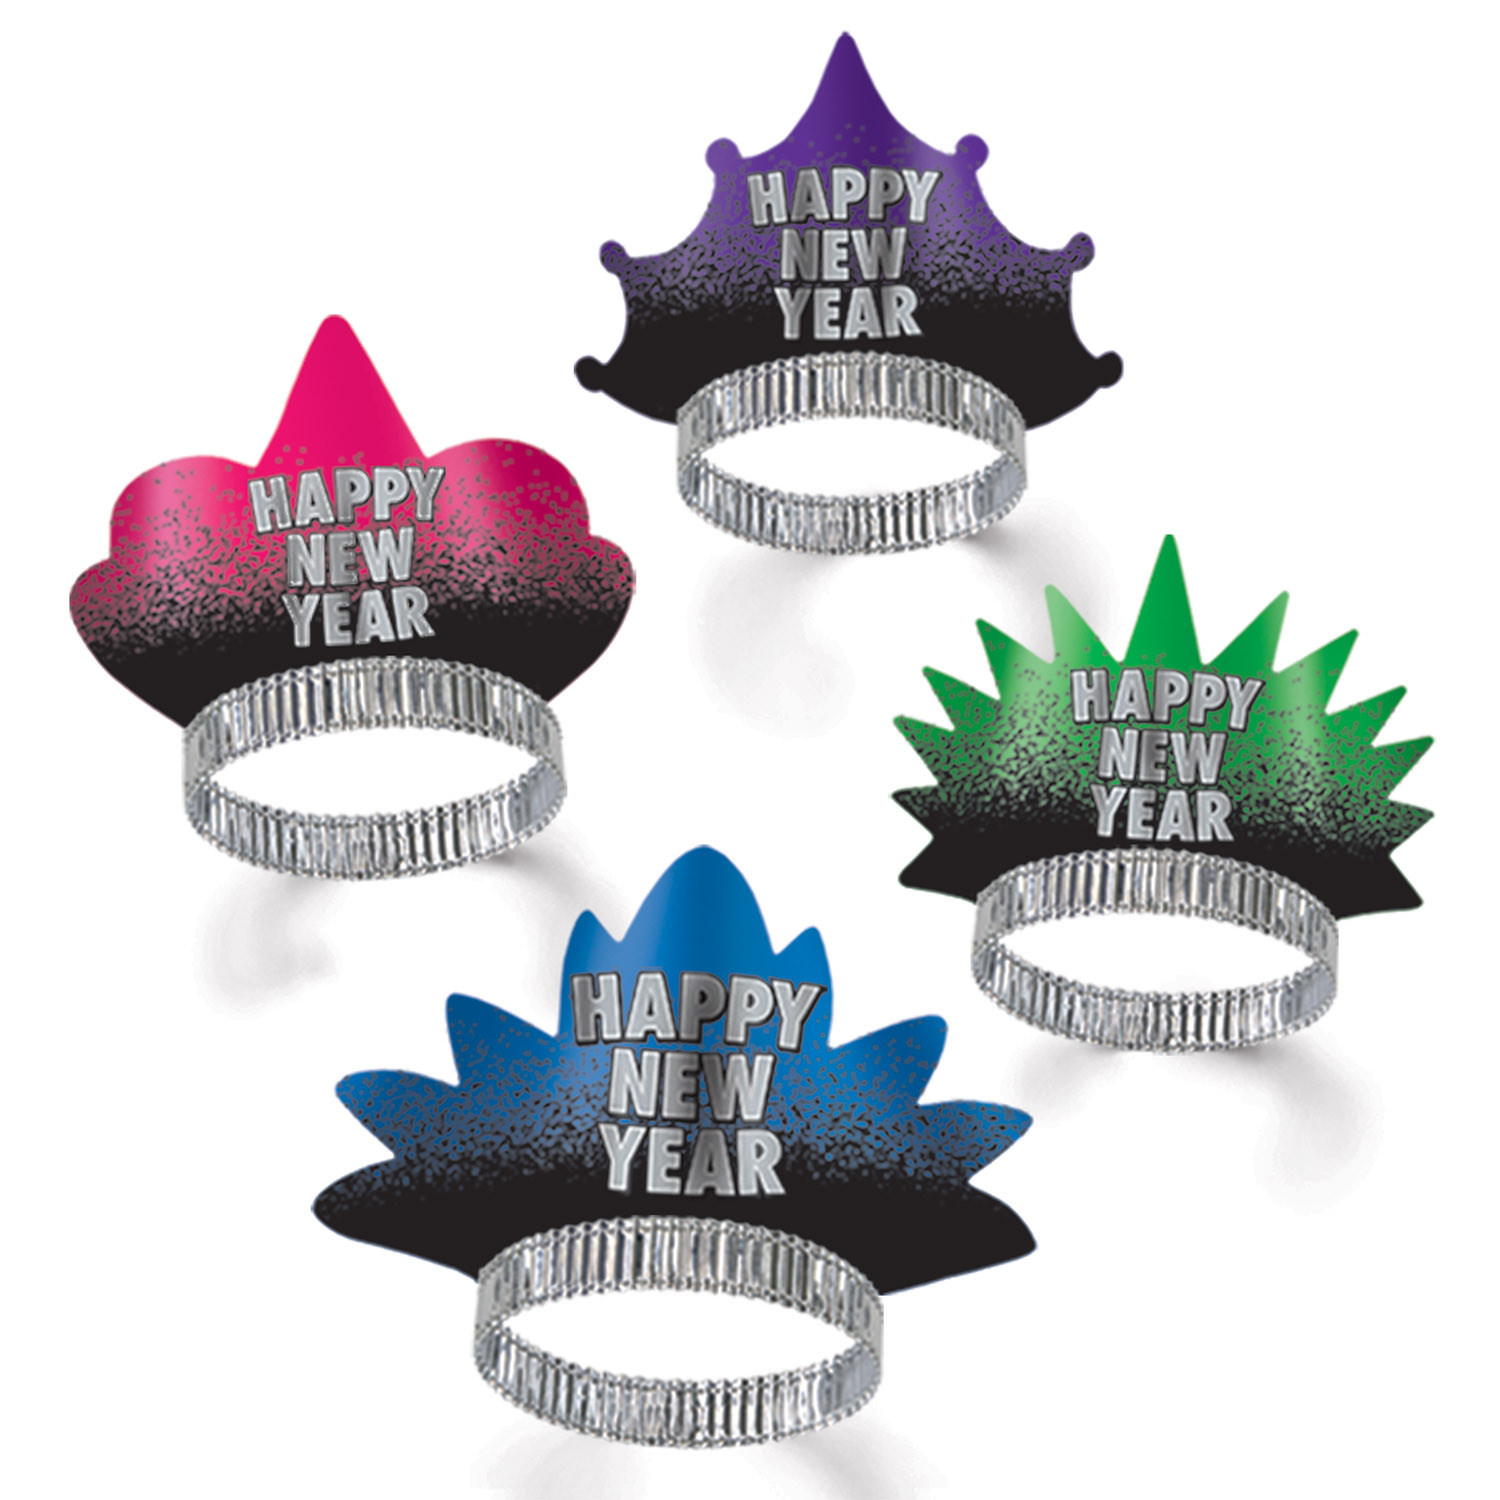 Four different shaped tiaras made from card stock material that is printed black on the bottoms and fades to either pink, purple, green or blue.